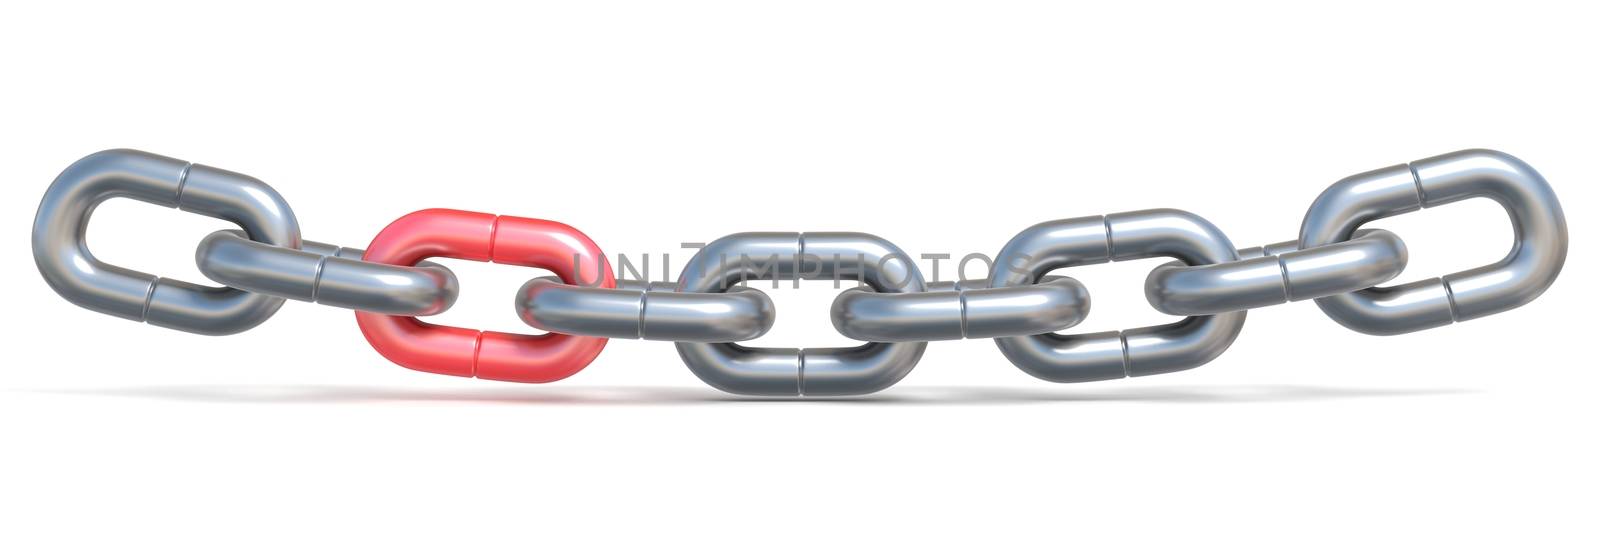 Chain with one red link 3D render illustration isolated on white background